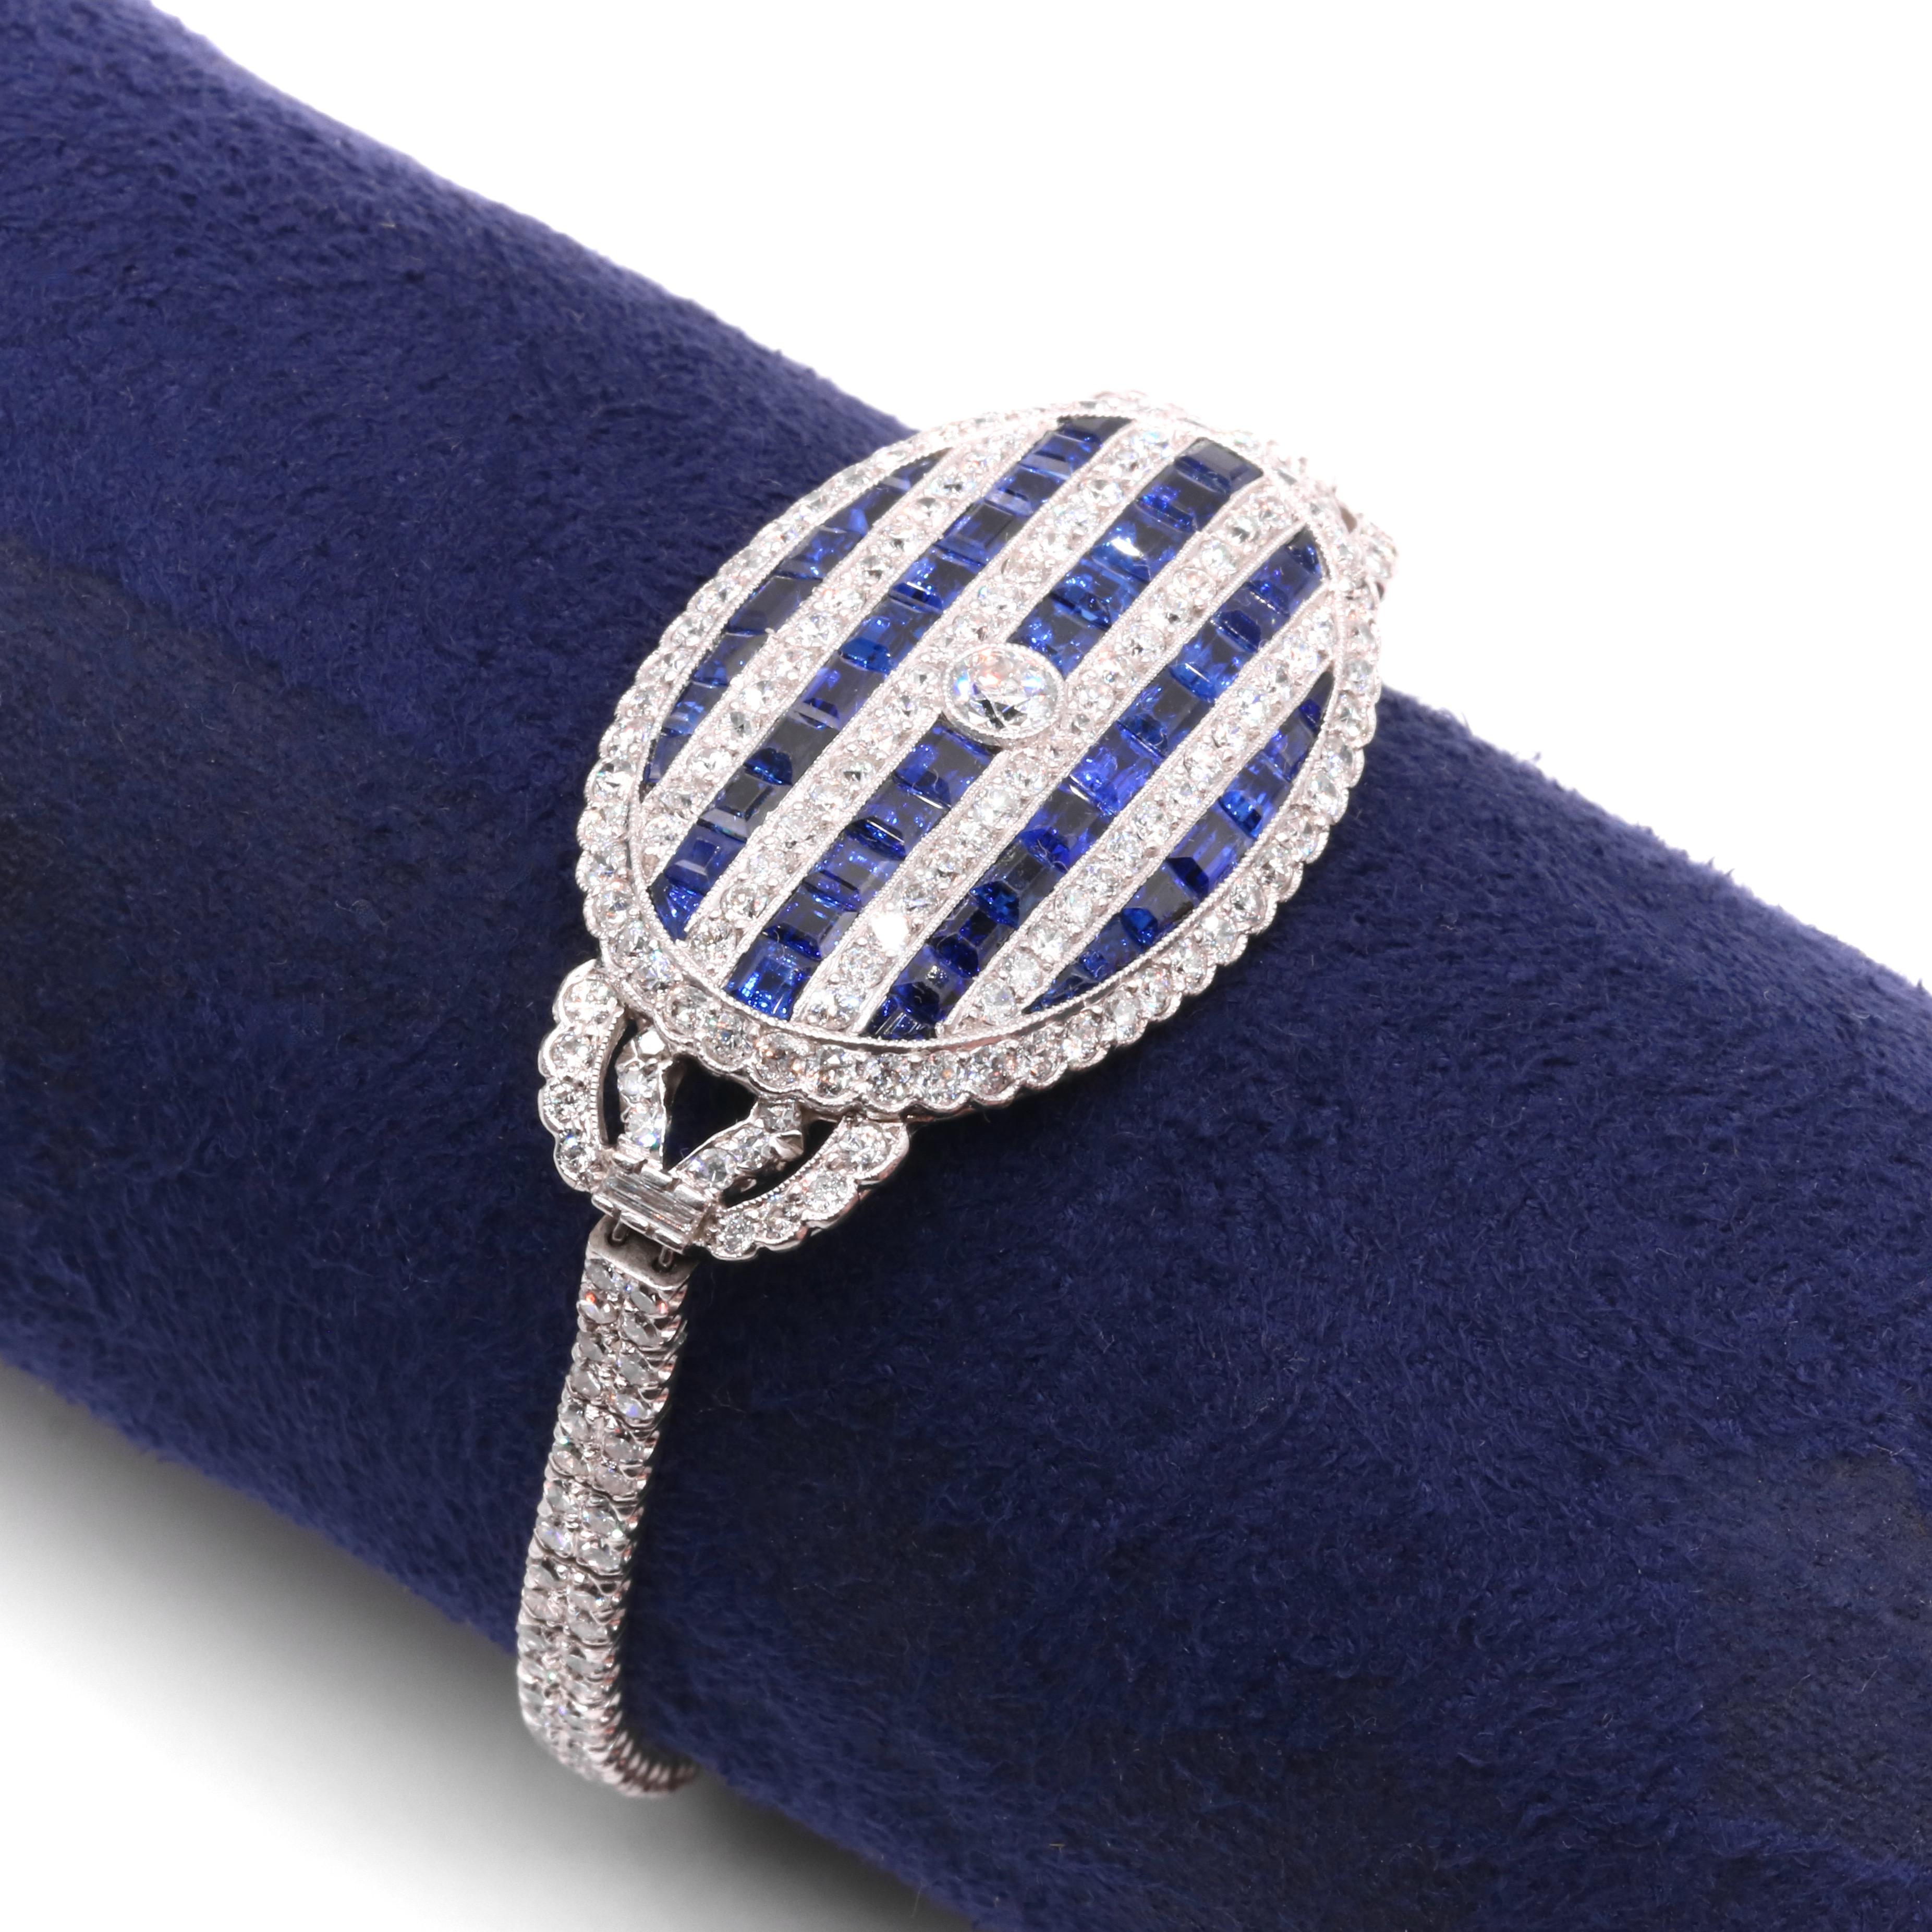 An Art Deco sapphire, diamond, platinum, and white gold bracelet, comprising one old European cut diamond, two baguette cut diamonds, two-hundred-and-thirty-nine old round cut diamonds, and forty-six calibre step cut sapphires, set in platinum and